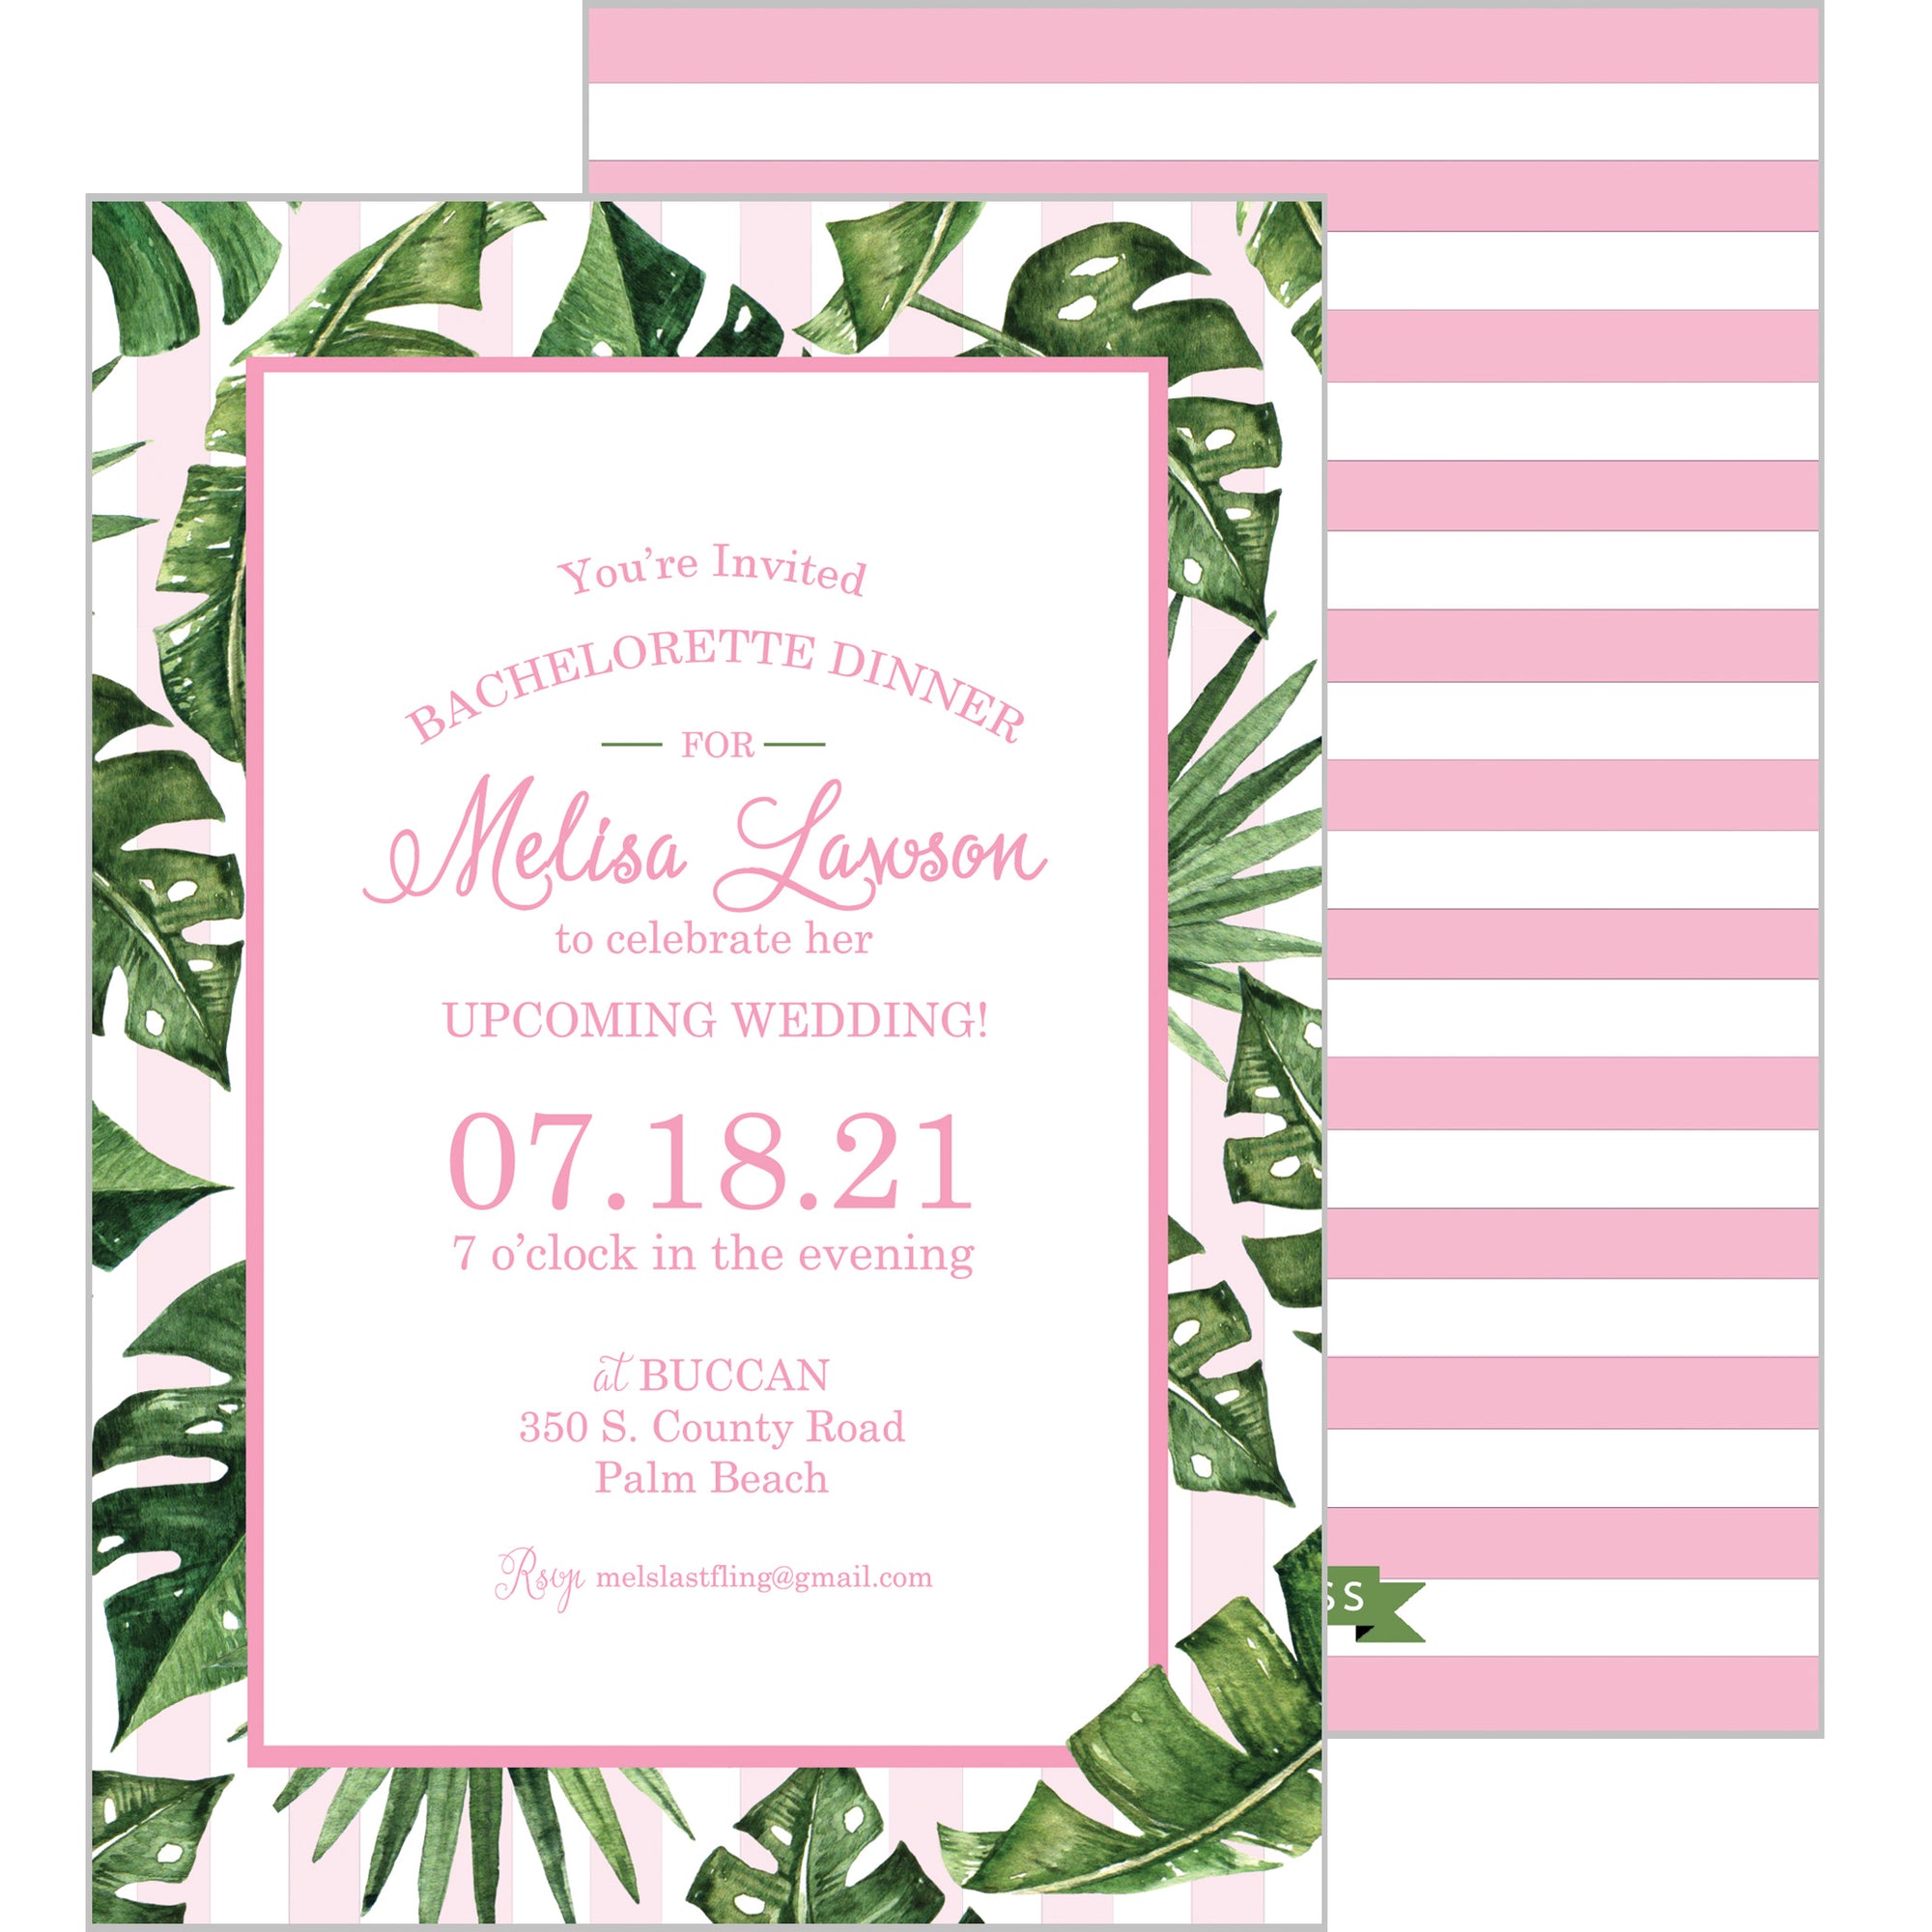 Watercolor Palm Leaves Party Invitation